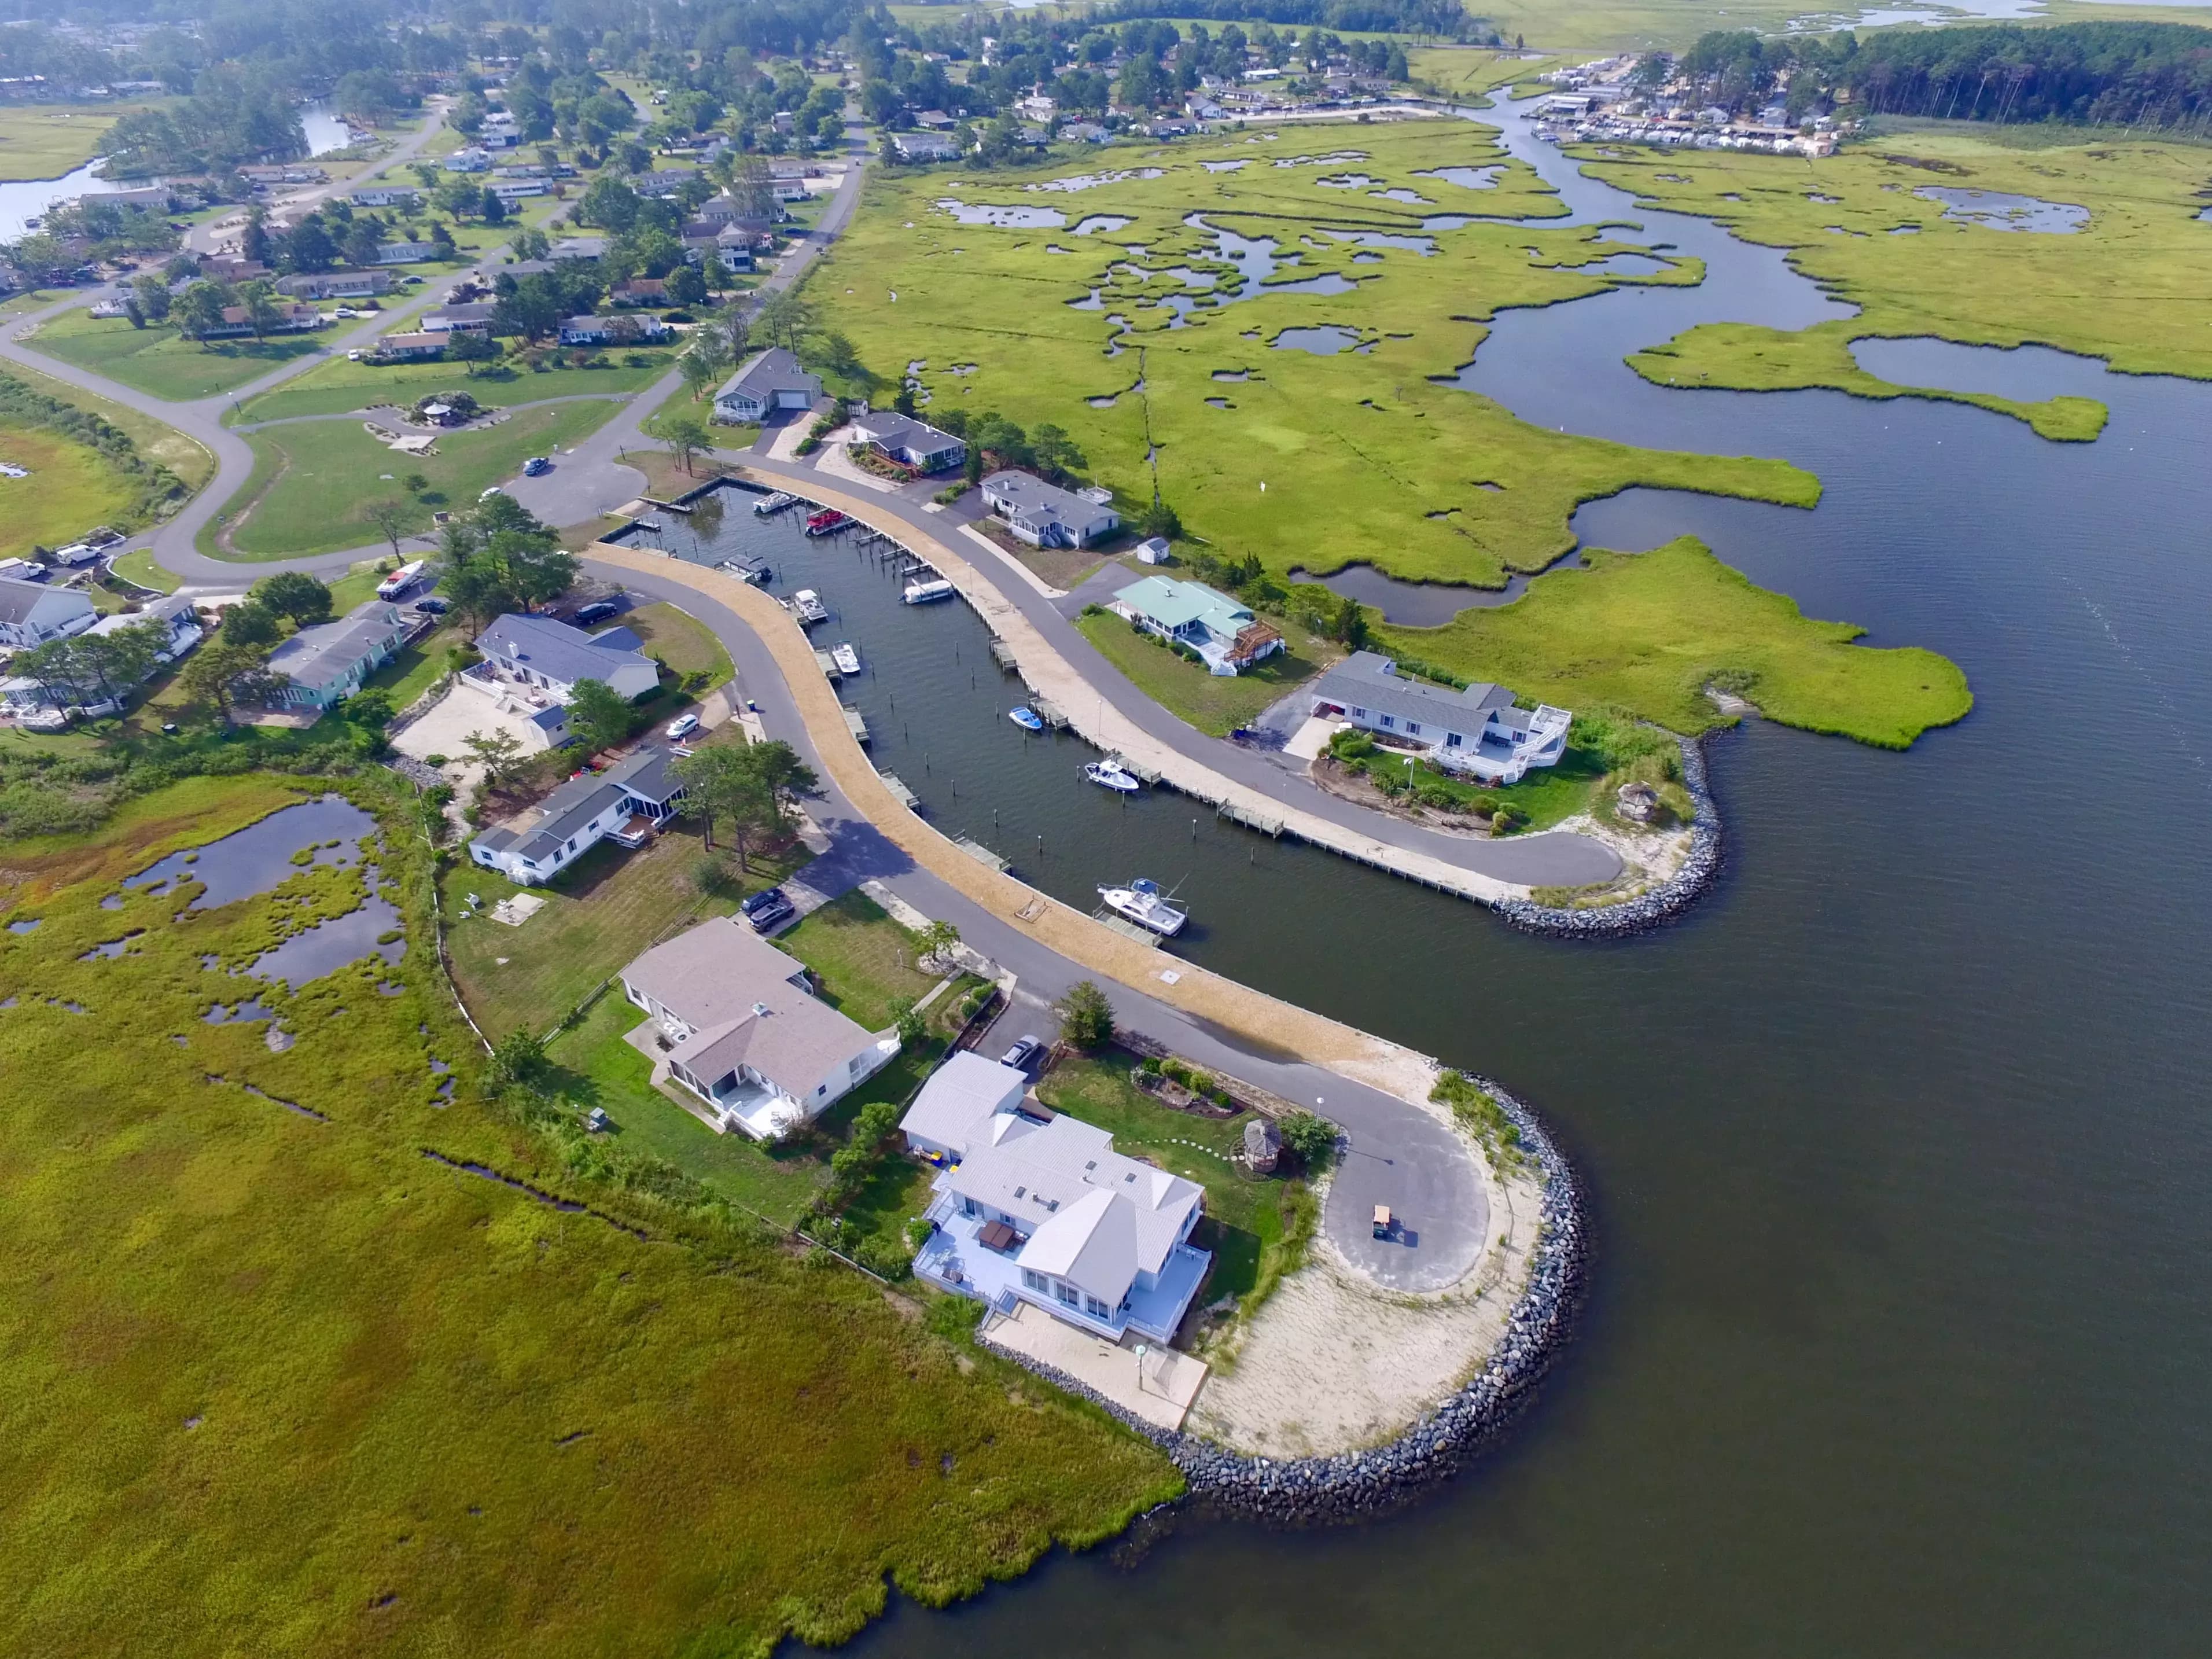 Pot-Nets Coveside offers an intimate community environment with convenient access to Rehoboth Bay, perfect for fishing and boating enthusiasts.